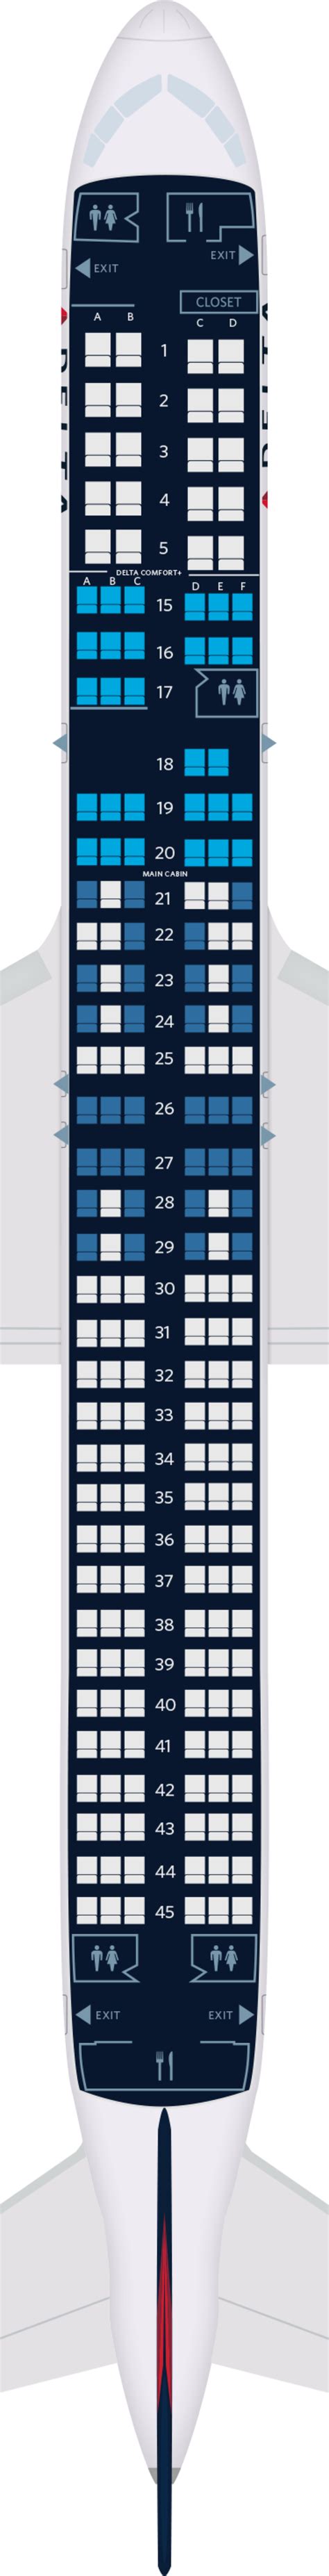 Delta Airlines 757 Seat Chart Elcho Table